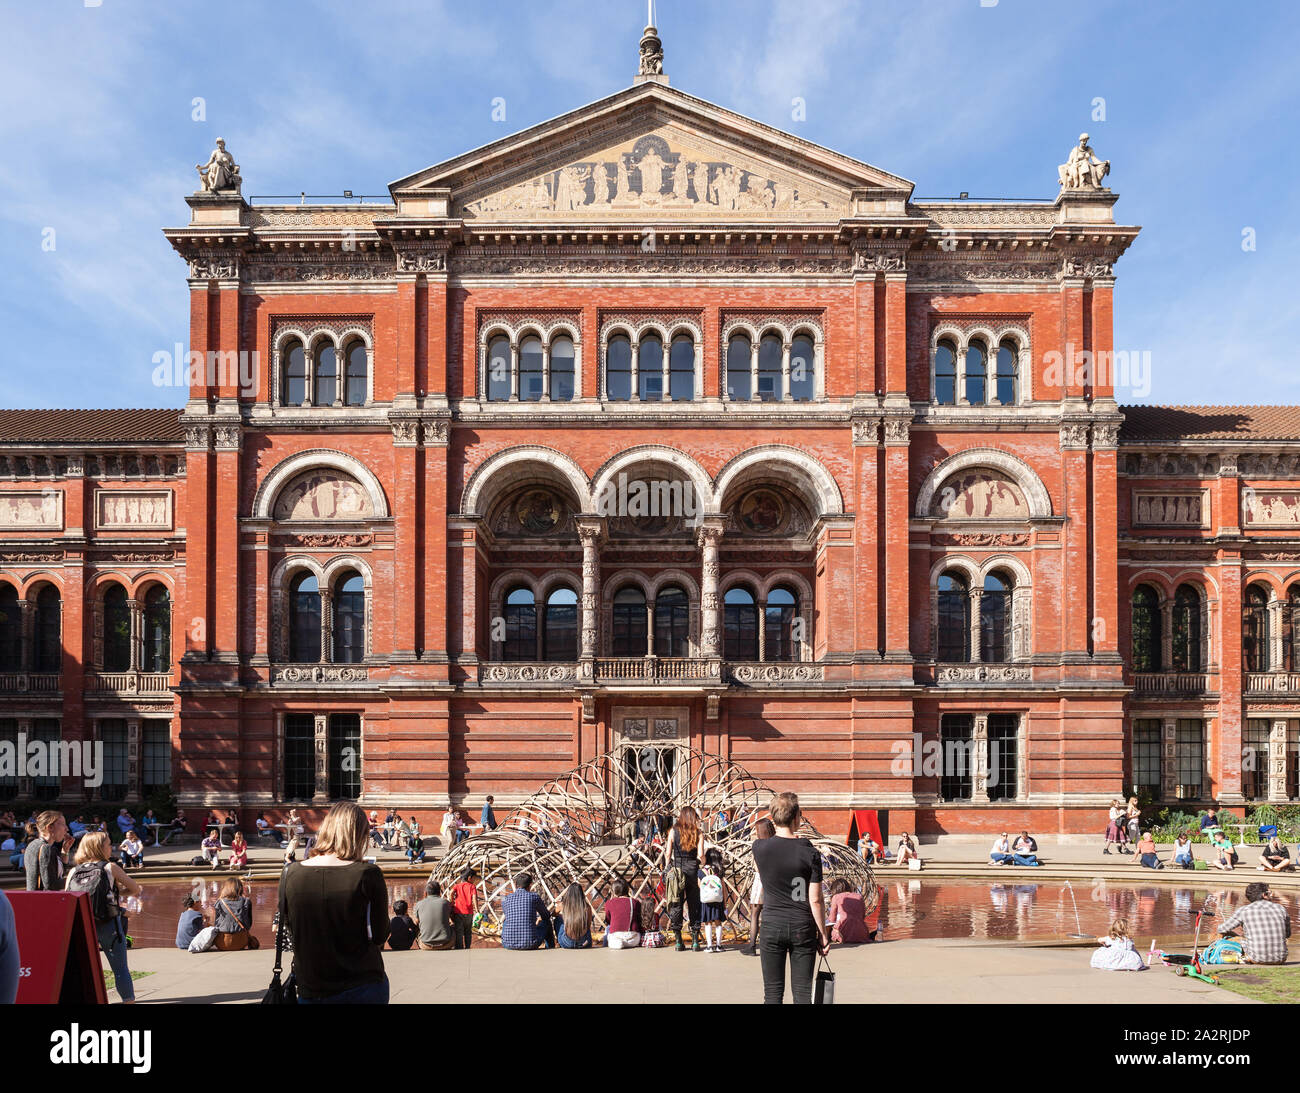 Crowds of visitors in the John Madejski Garden in the Victoria and Albert Museum in London. Stock Photo